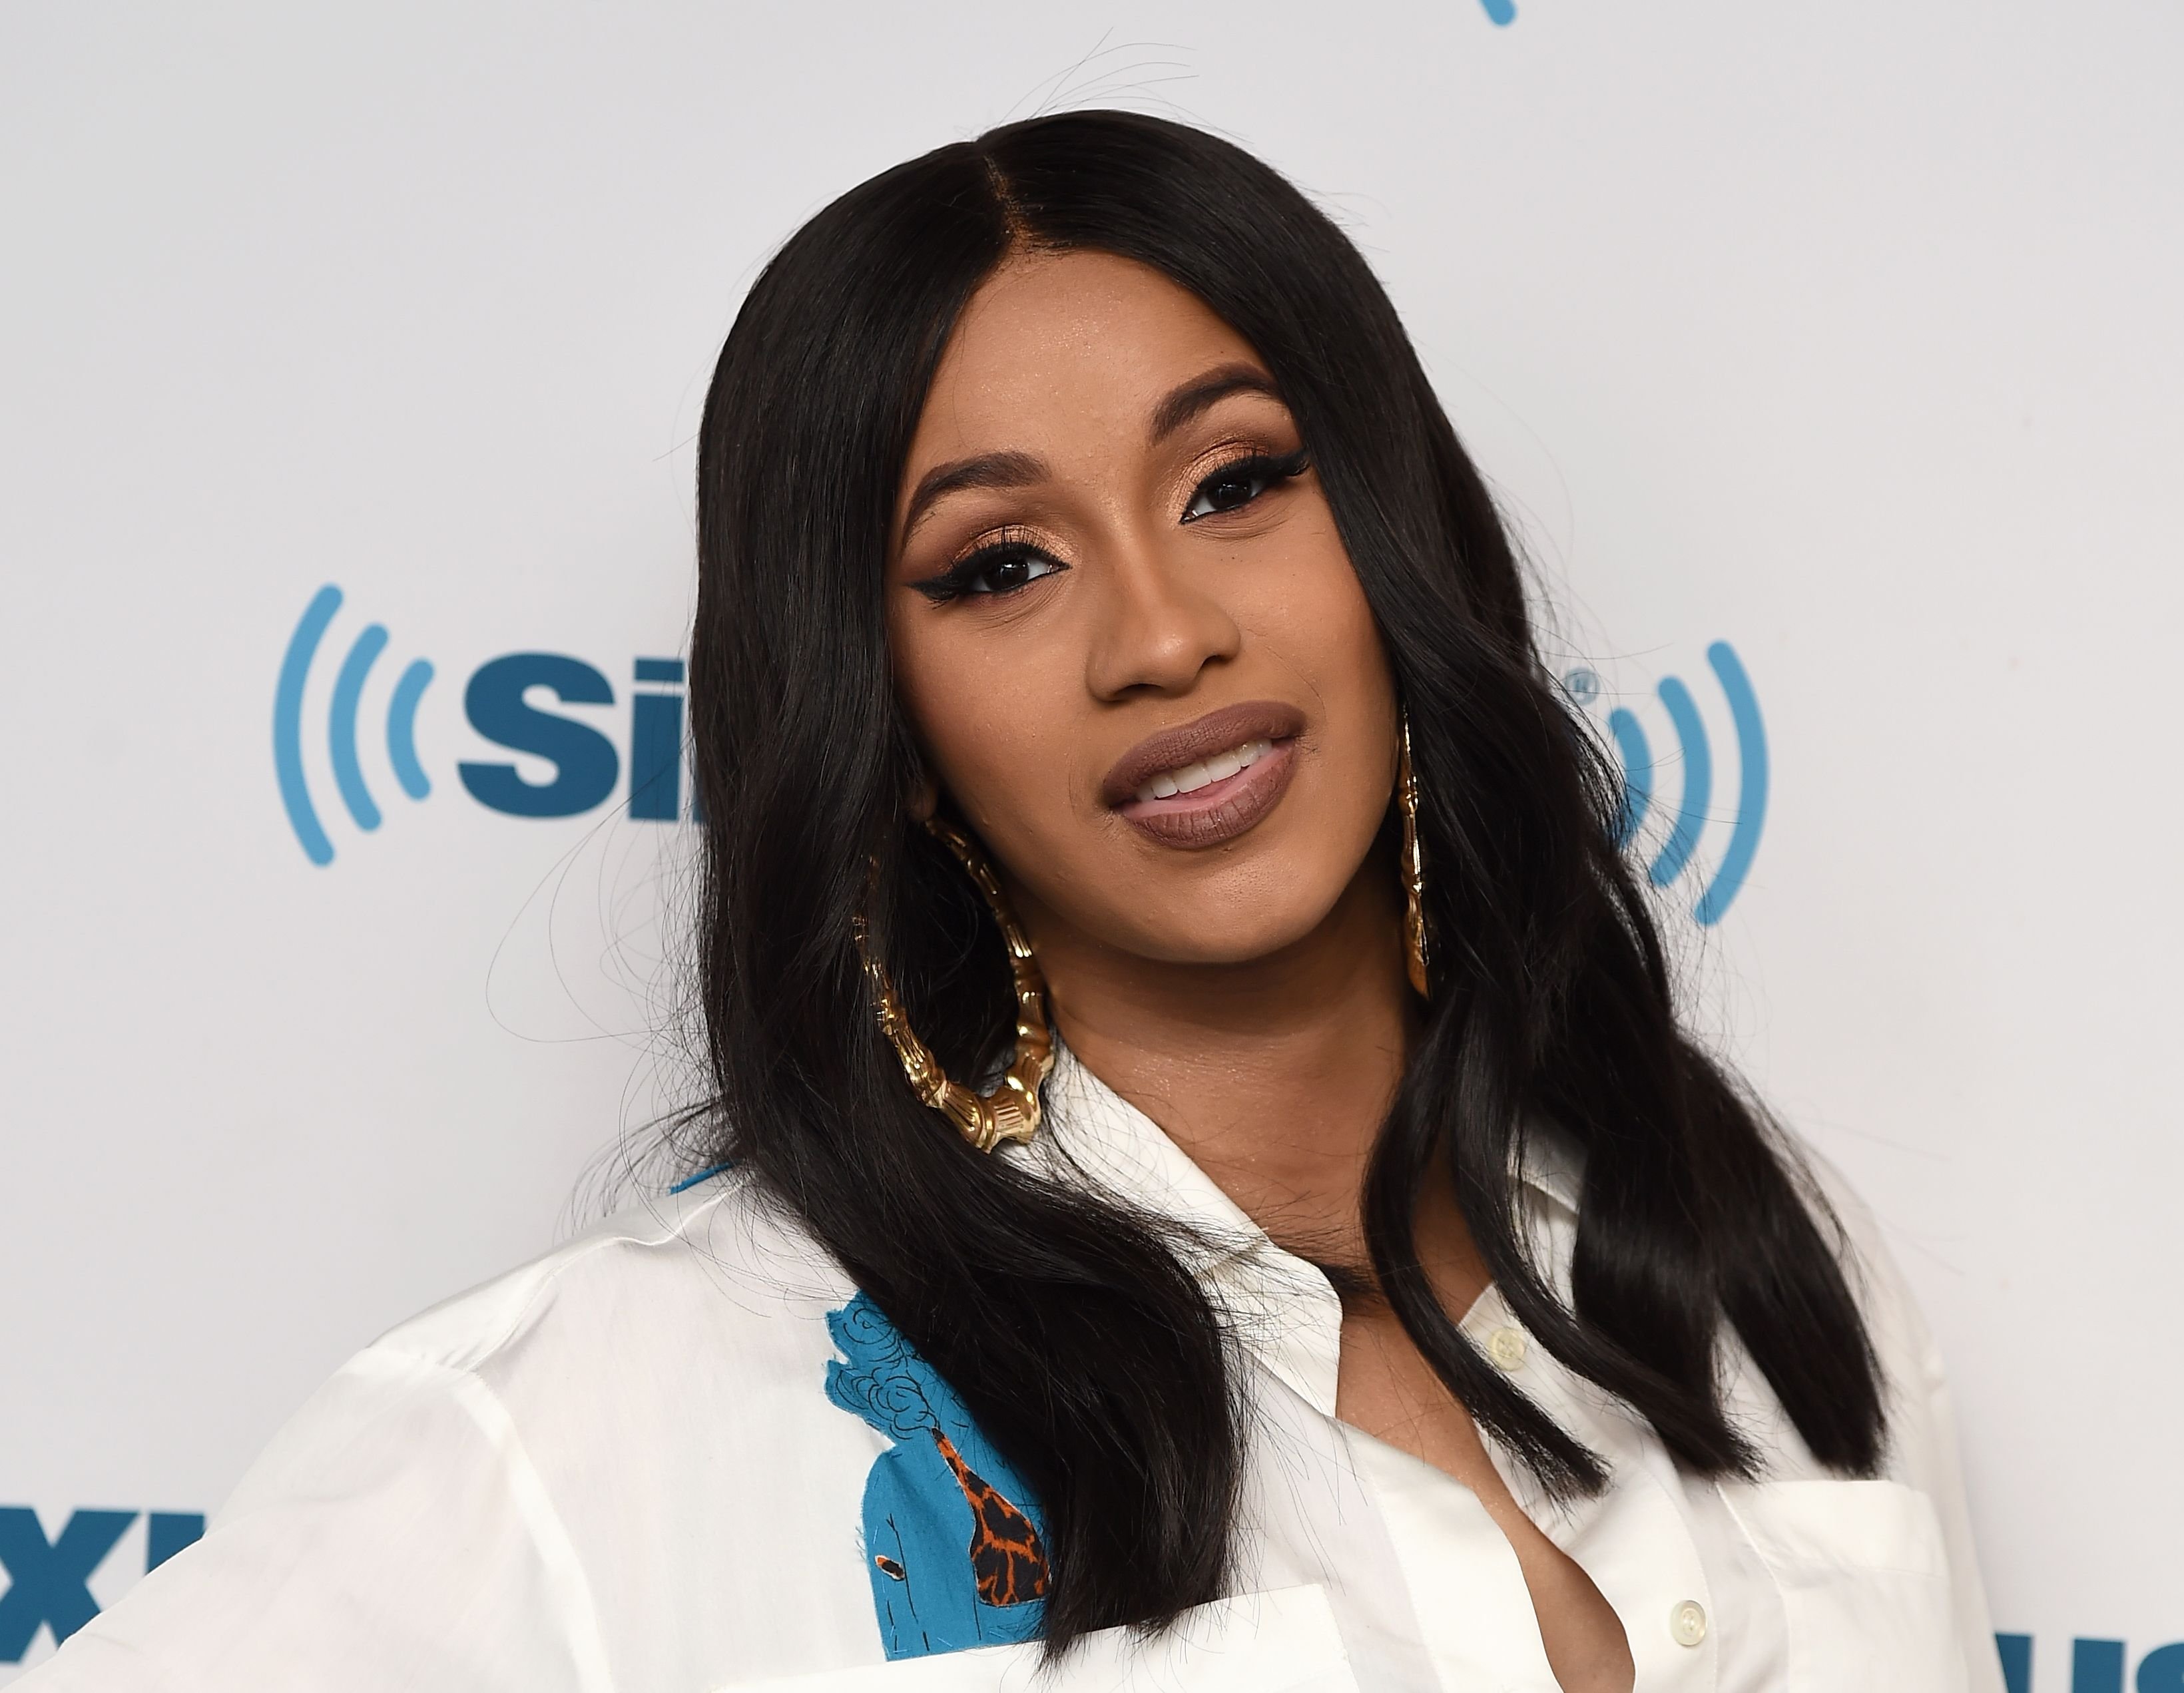 Rapper Cardi B visit the SiriusXM Studios on May 9, 2018 | Photo: Getty Images